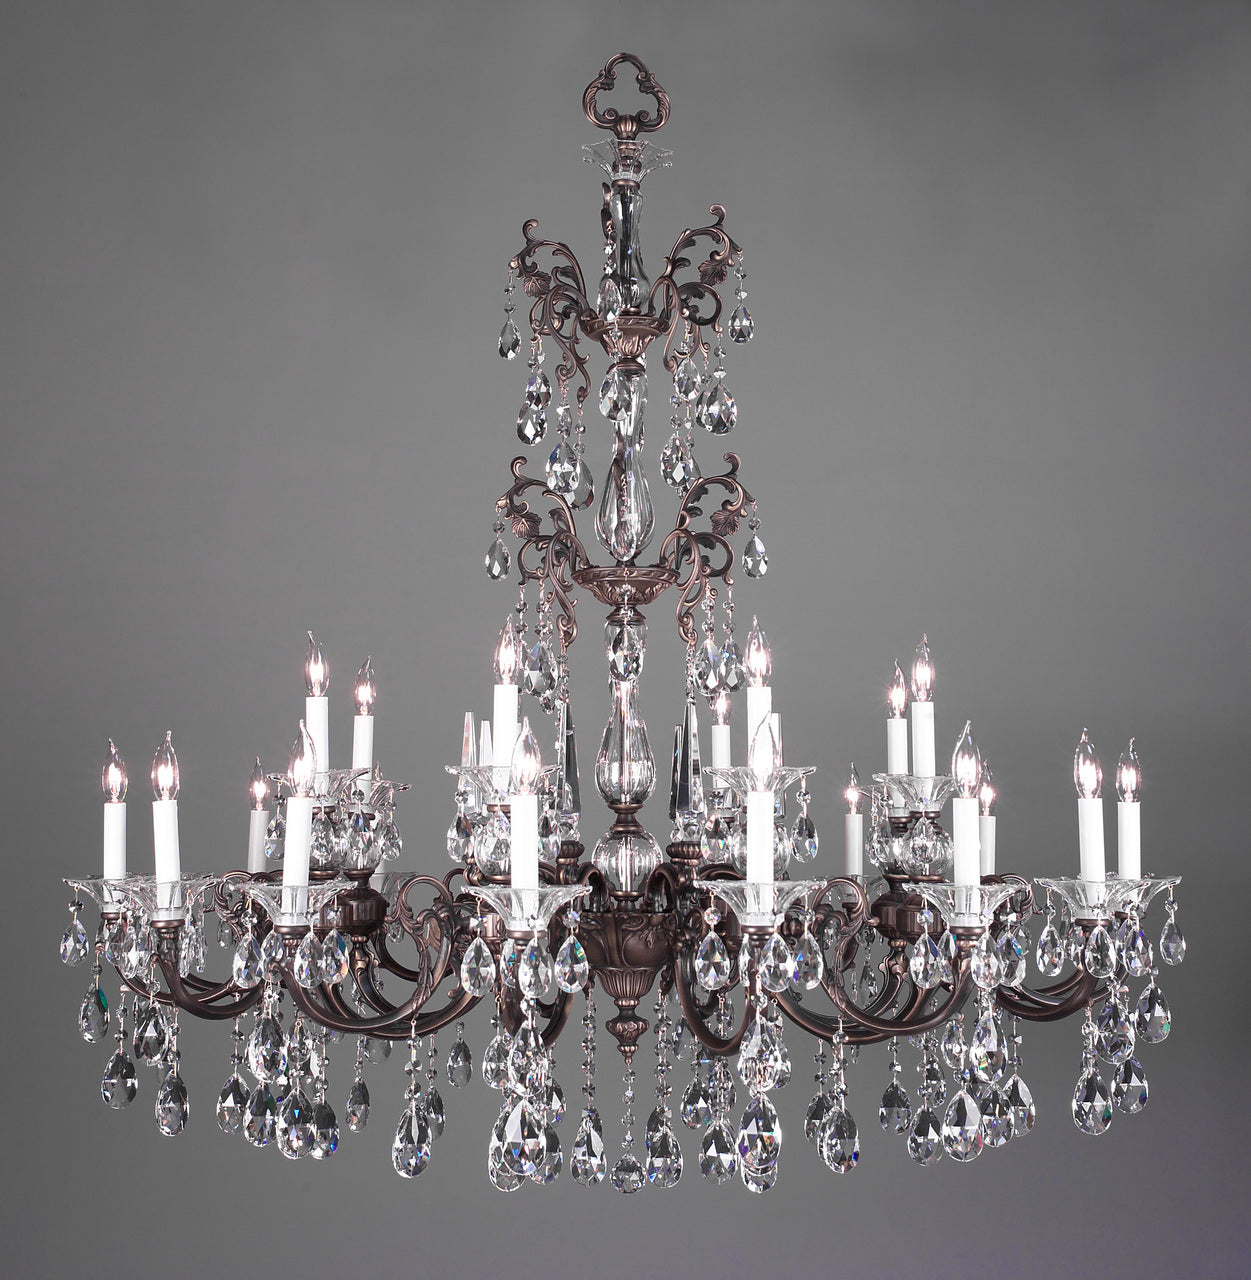 Classic Lighting 57065 SS SGT Via Lombardi Crystal Chandelier in Silverstone (Imported from Spain)